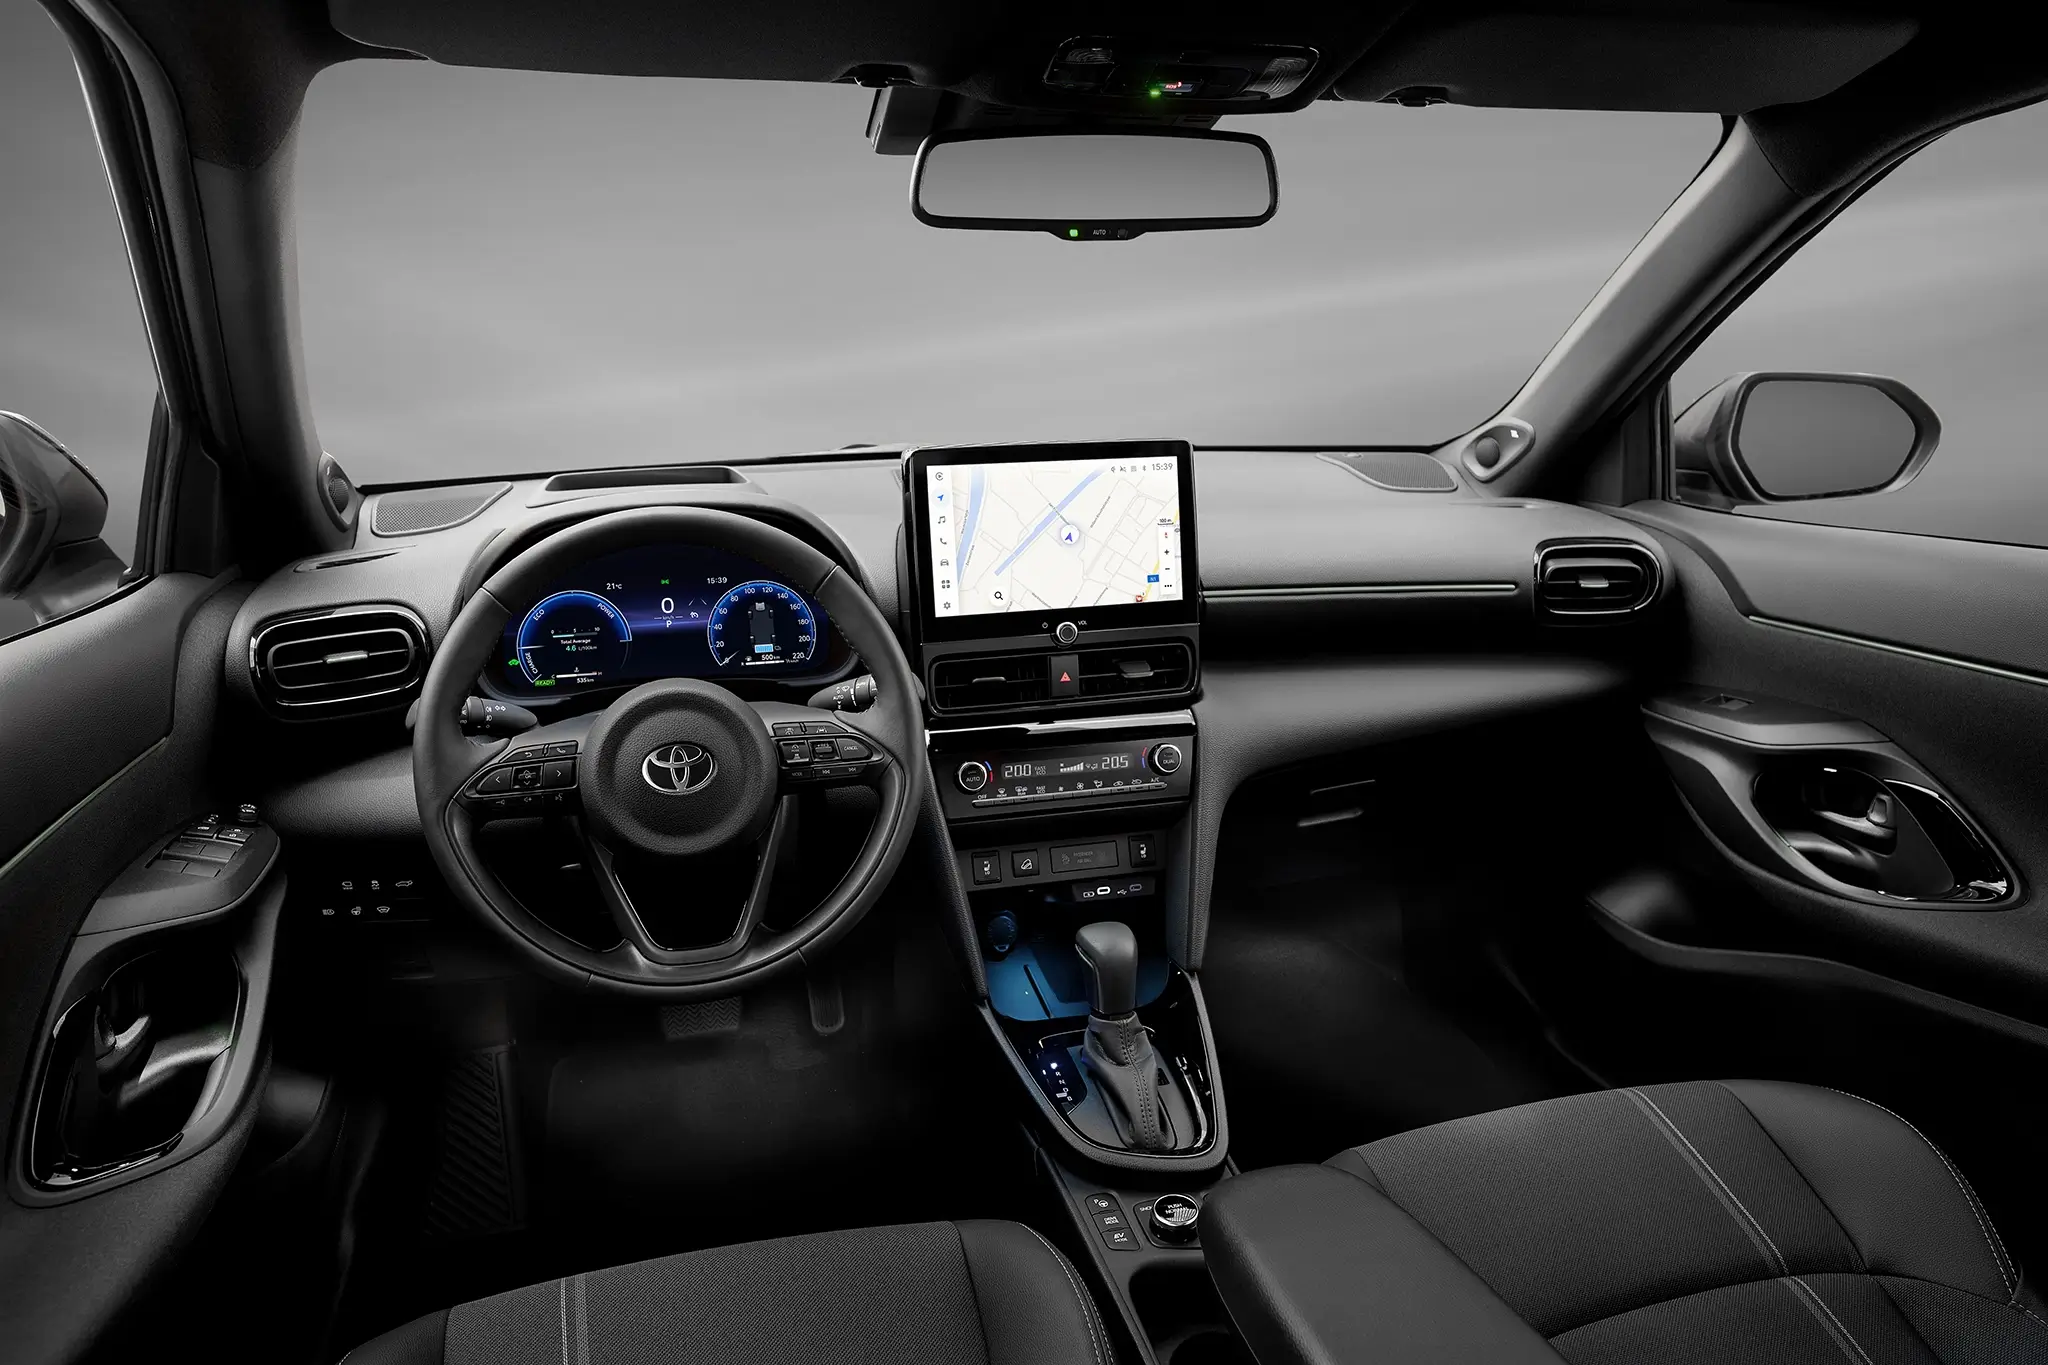 Toyota Yaris Cross Premier Edition - from the inside